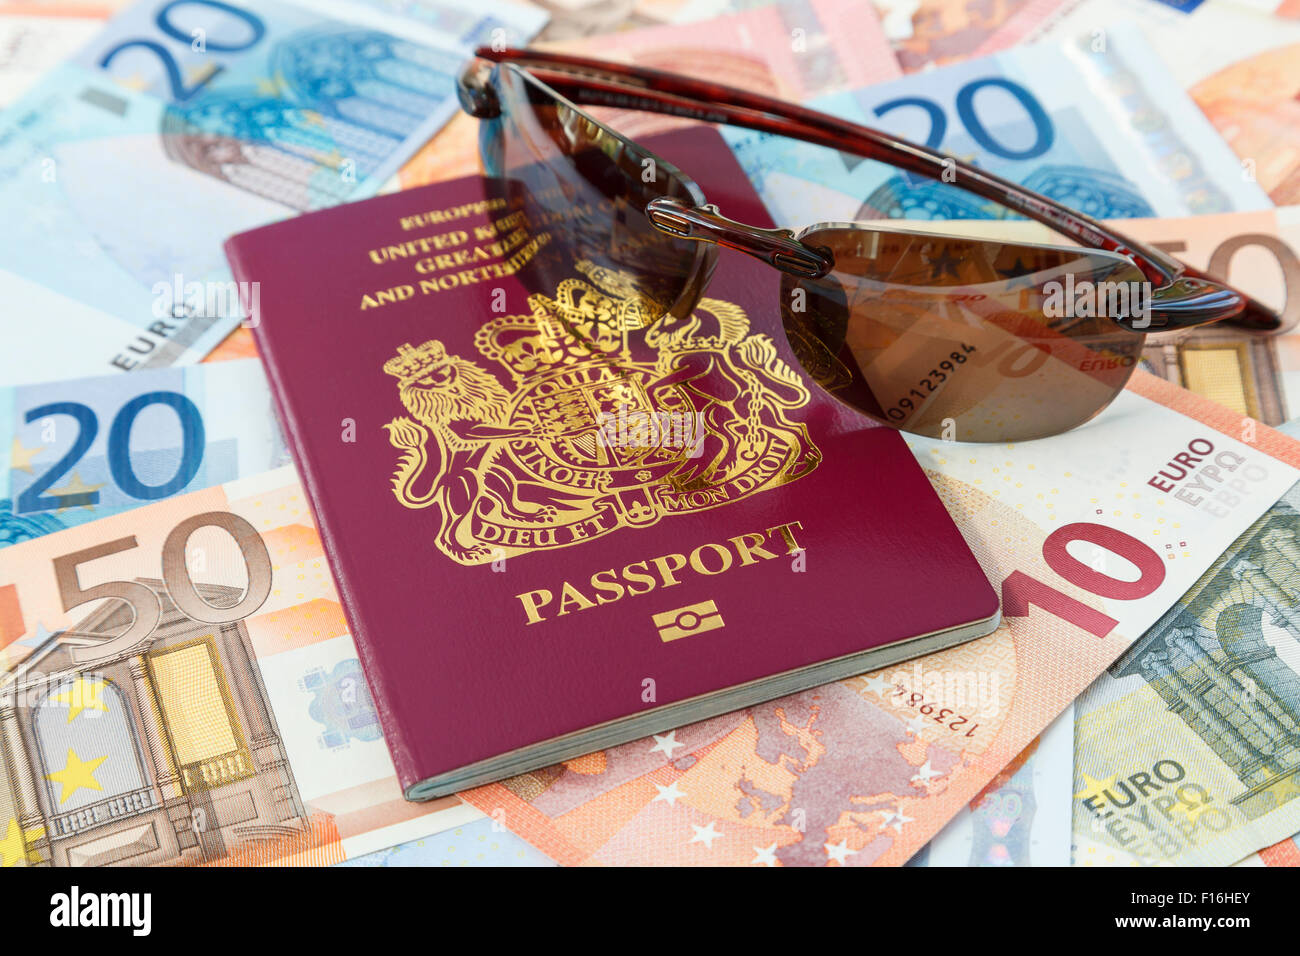 Travel things with a British passport Euro currency and sunglasses for travelling to Eurozone countries from UK. European holiday money Brexit concept Stock Photo